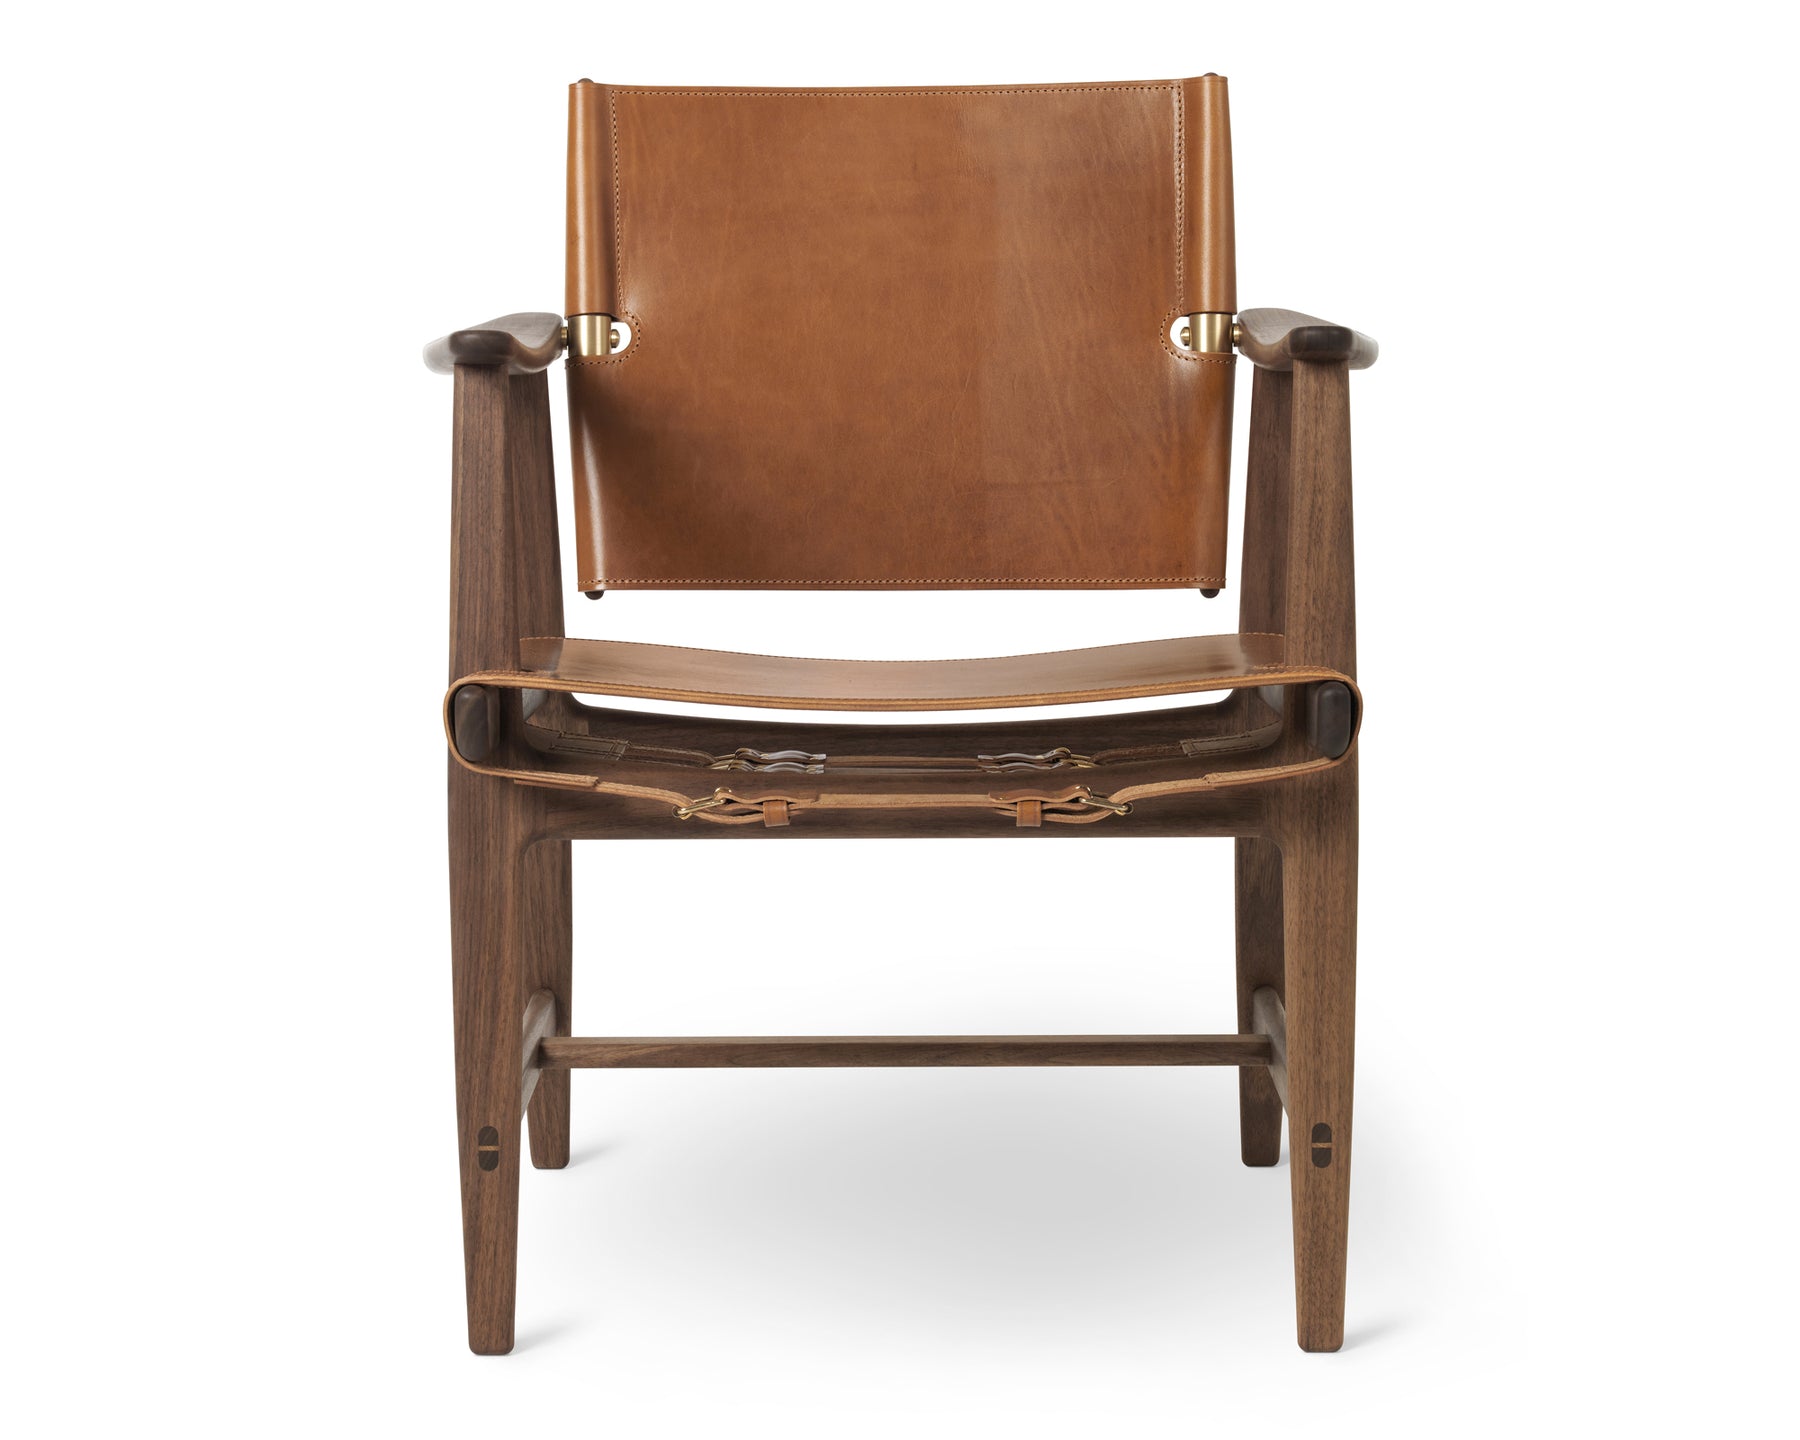 Brown Saddle Leather Chair | DSHOP